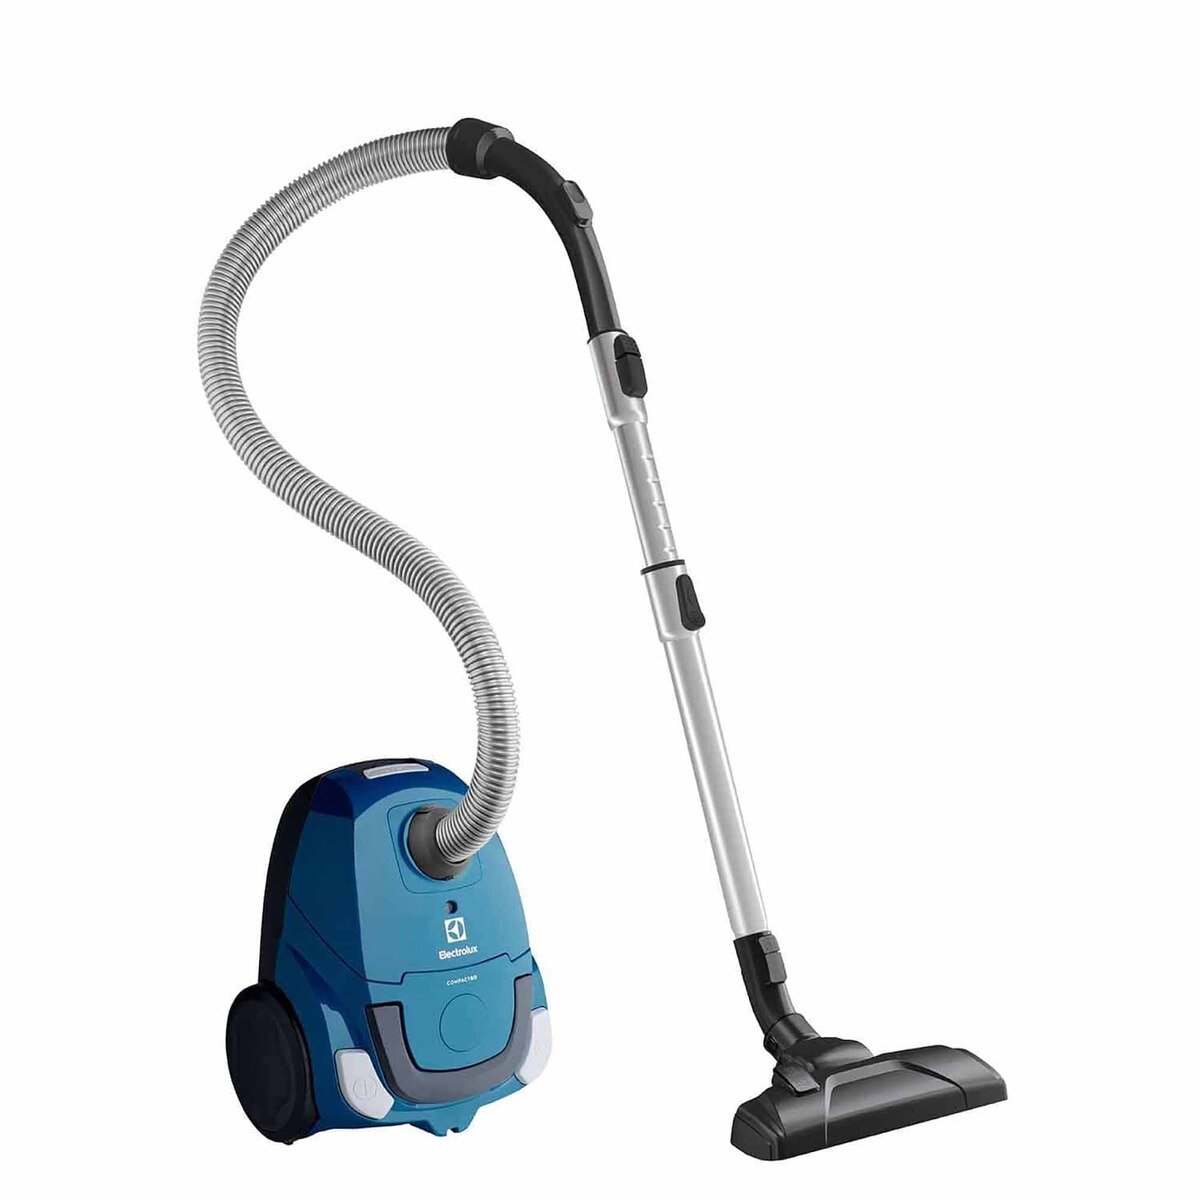 Electrolux Bagged Vacuum Cleaner Z1220 1400W